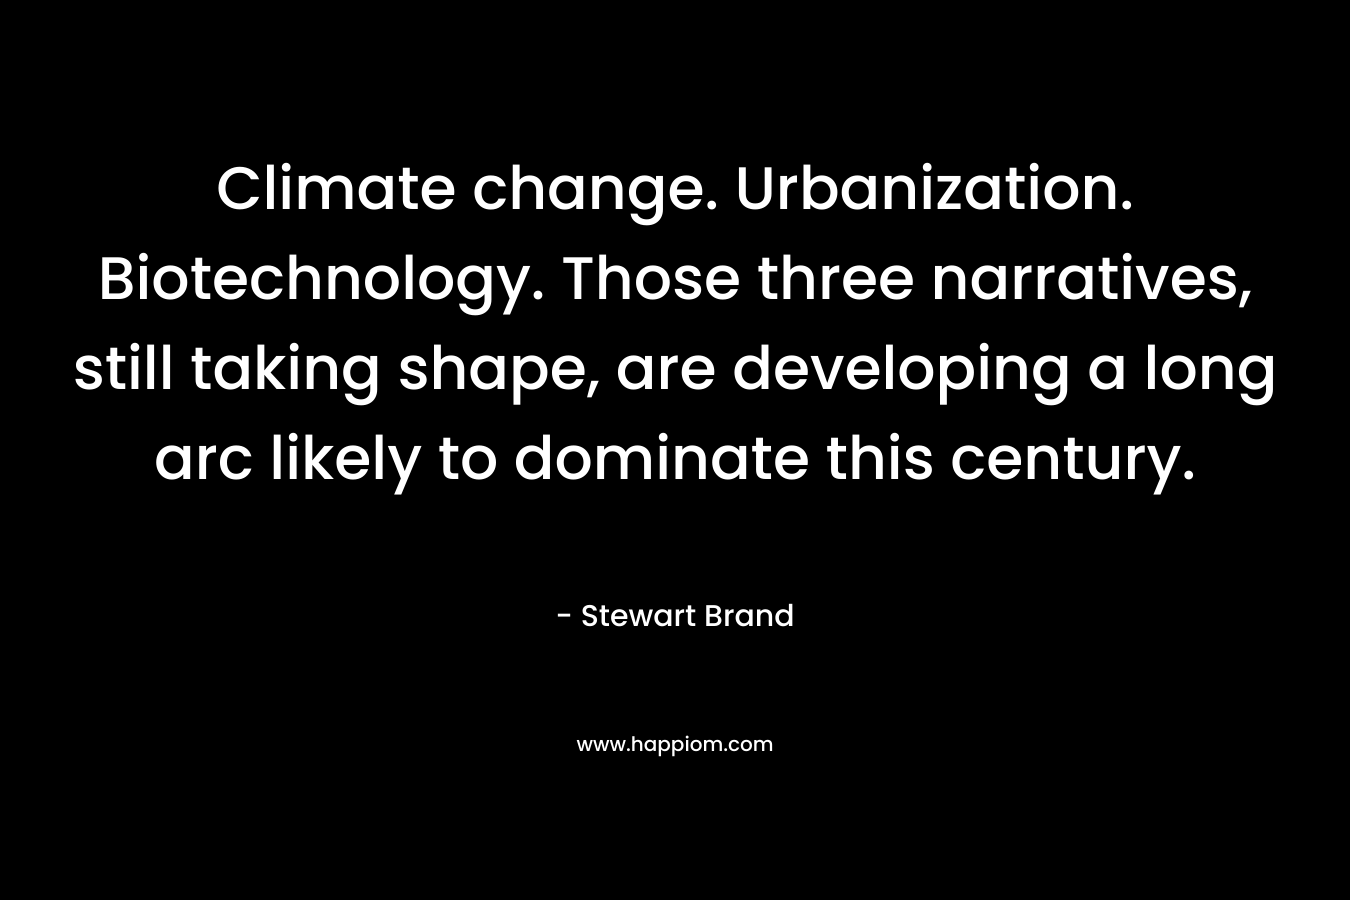 Climate change. Urbanization. Biotechnology. Those three narratives, still taking shape, are developing a long arc likely to dominate this century. – Stewart Brand